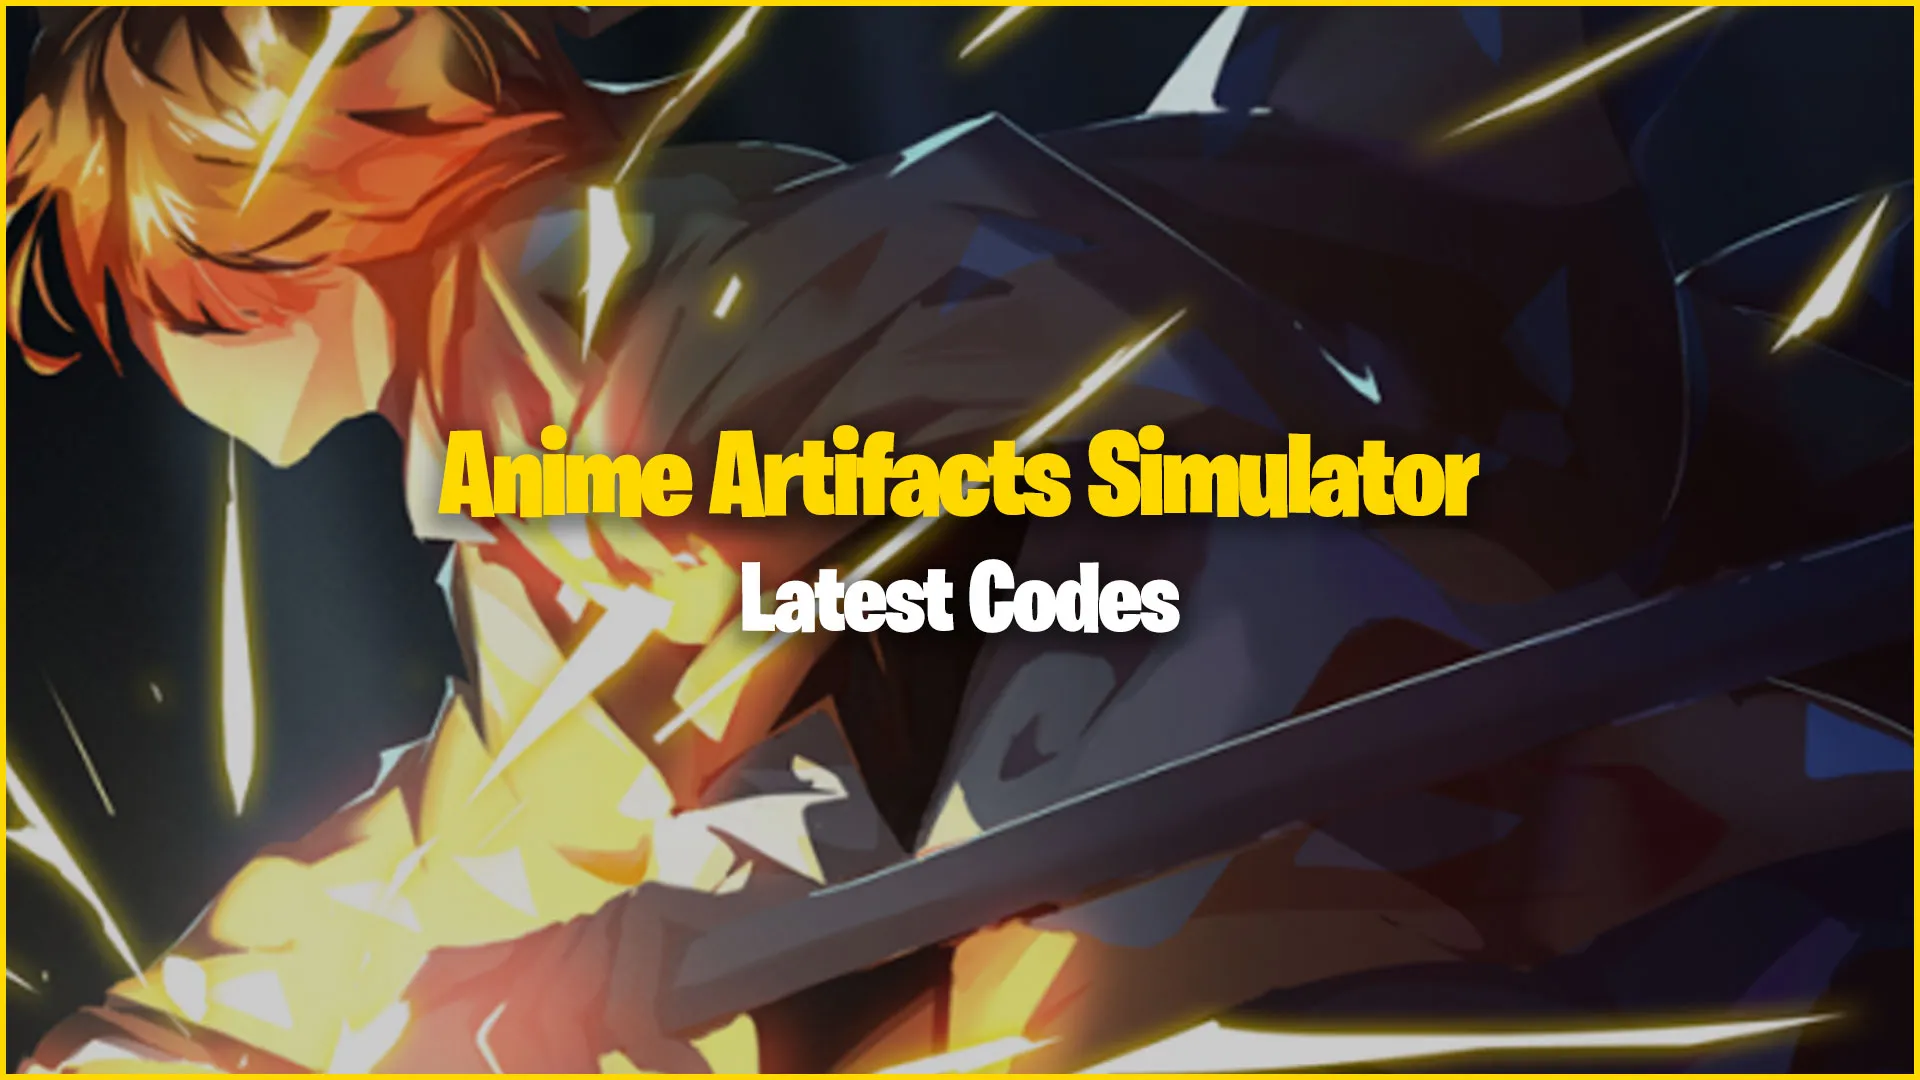 ALL CODES WORK HALLOWEEN UPDATE Anime Artifacts Simulator 2 ROBLOX  28  October 2022  YouTube